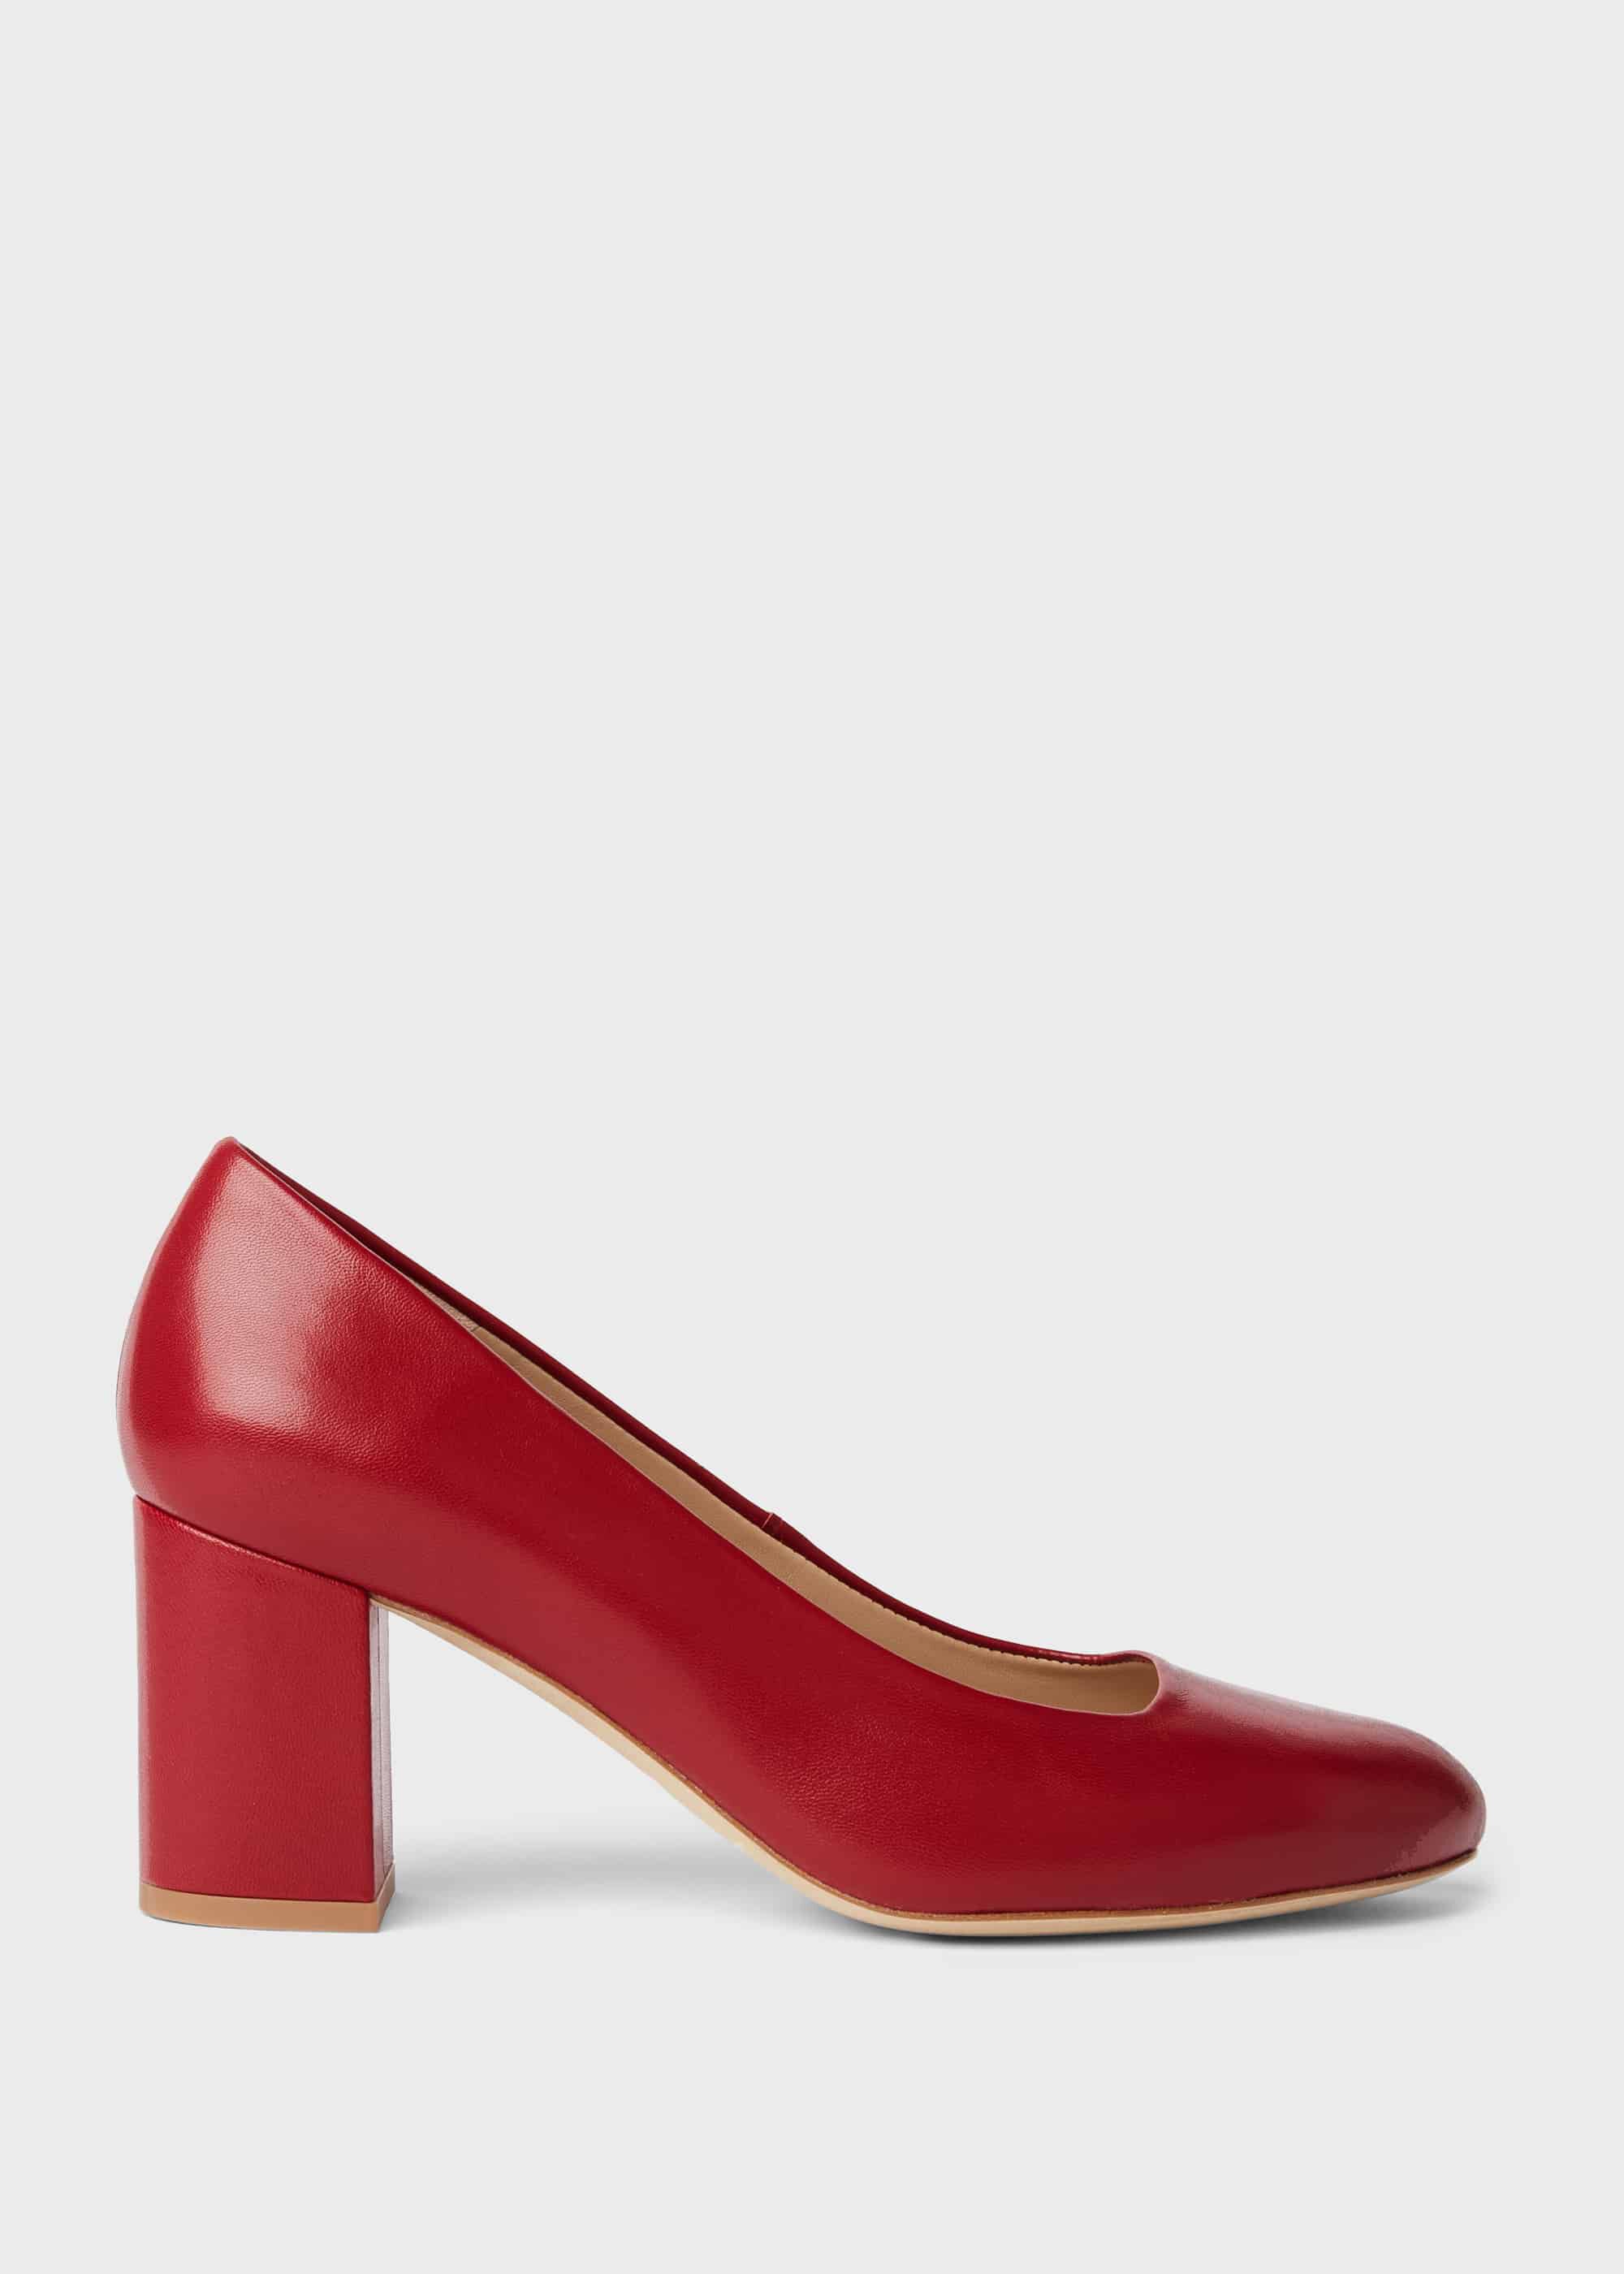 red high heel court shoes